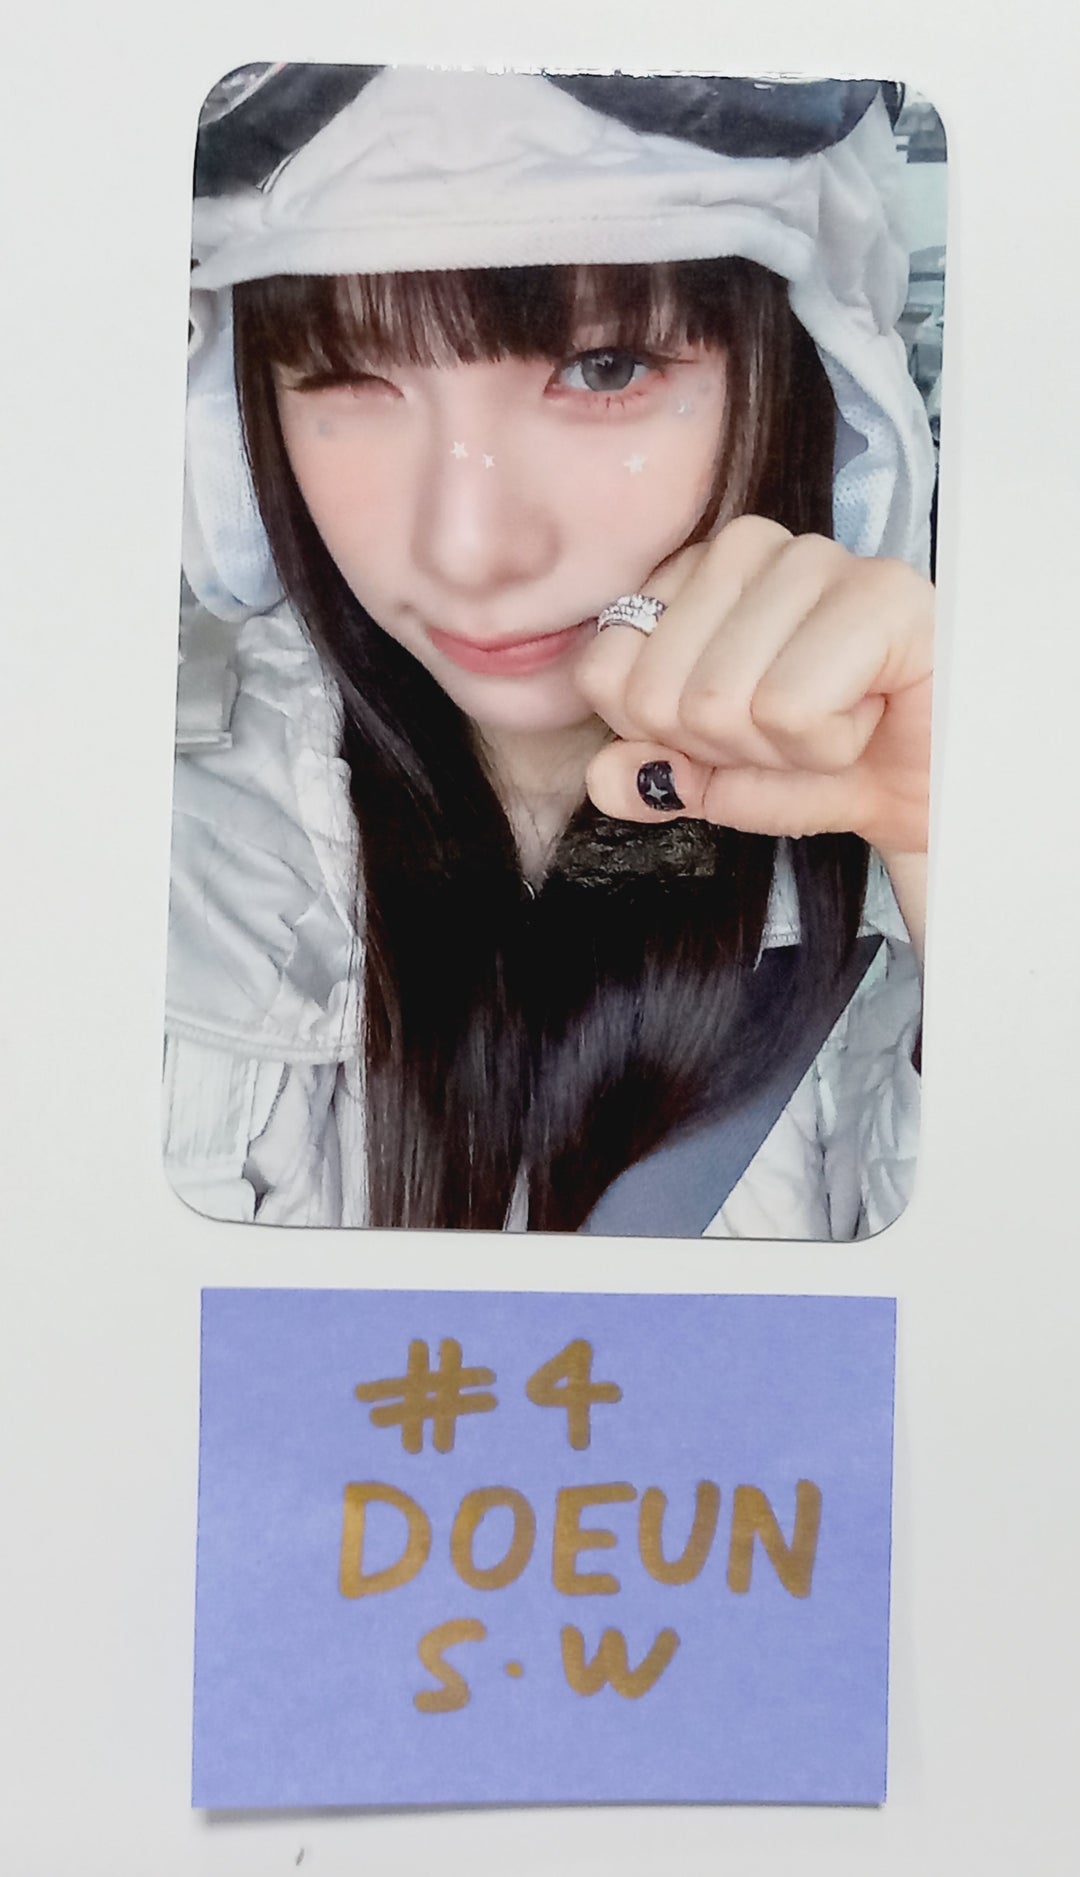 YOUNG POSSE "XXL" - Soundwave Fansign Event Winner Photocard [24.4.12]